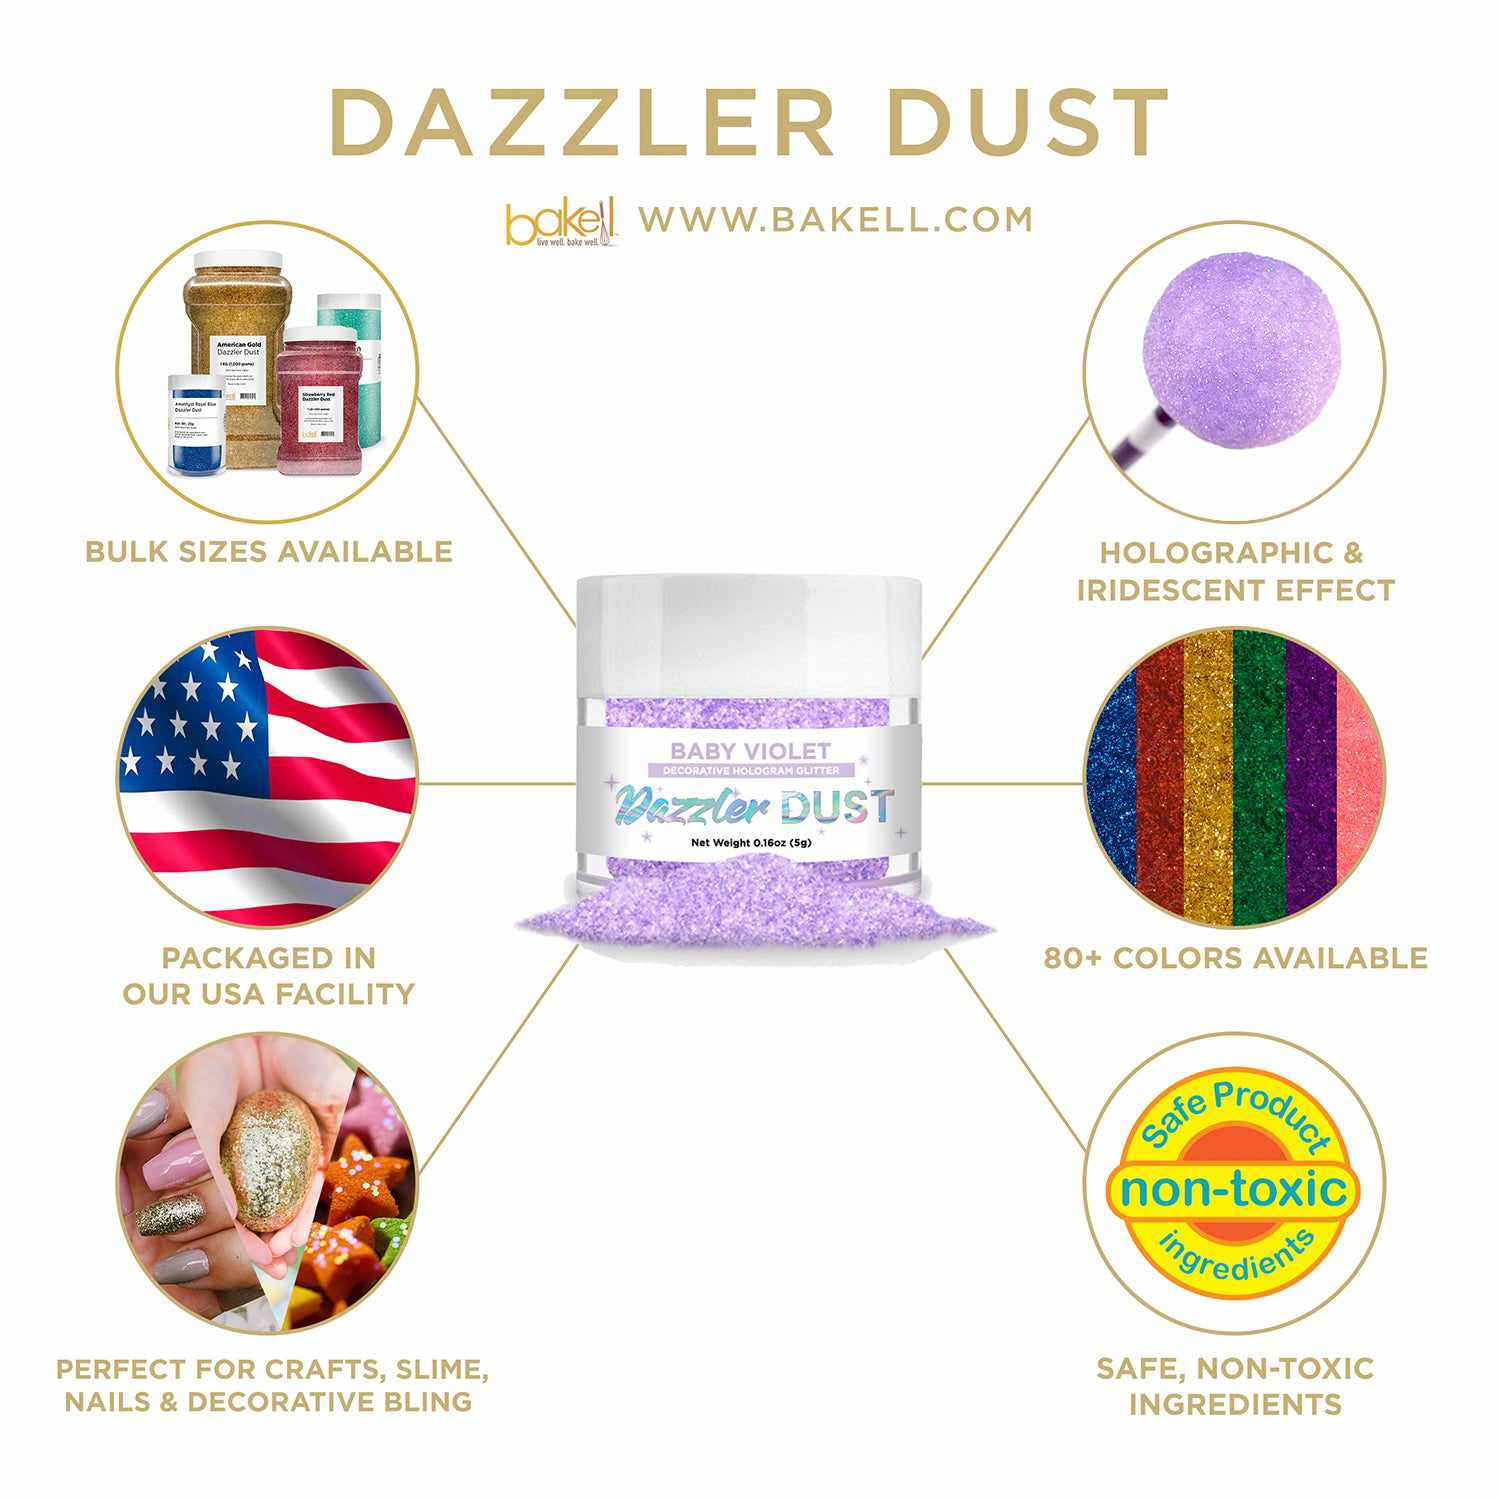 Non Toxic Decorating & Craft Holographic Glitter for Tumblers, Baking, Nail Art & More | Bakell.com